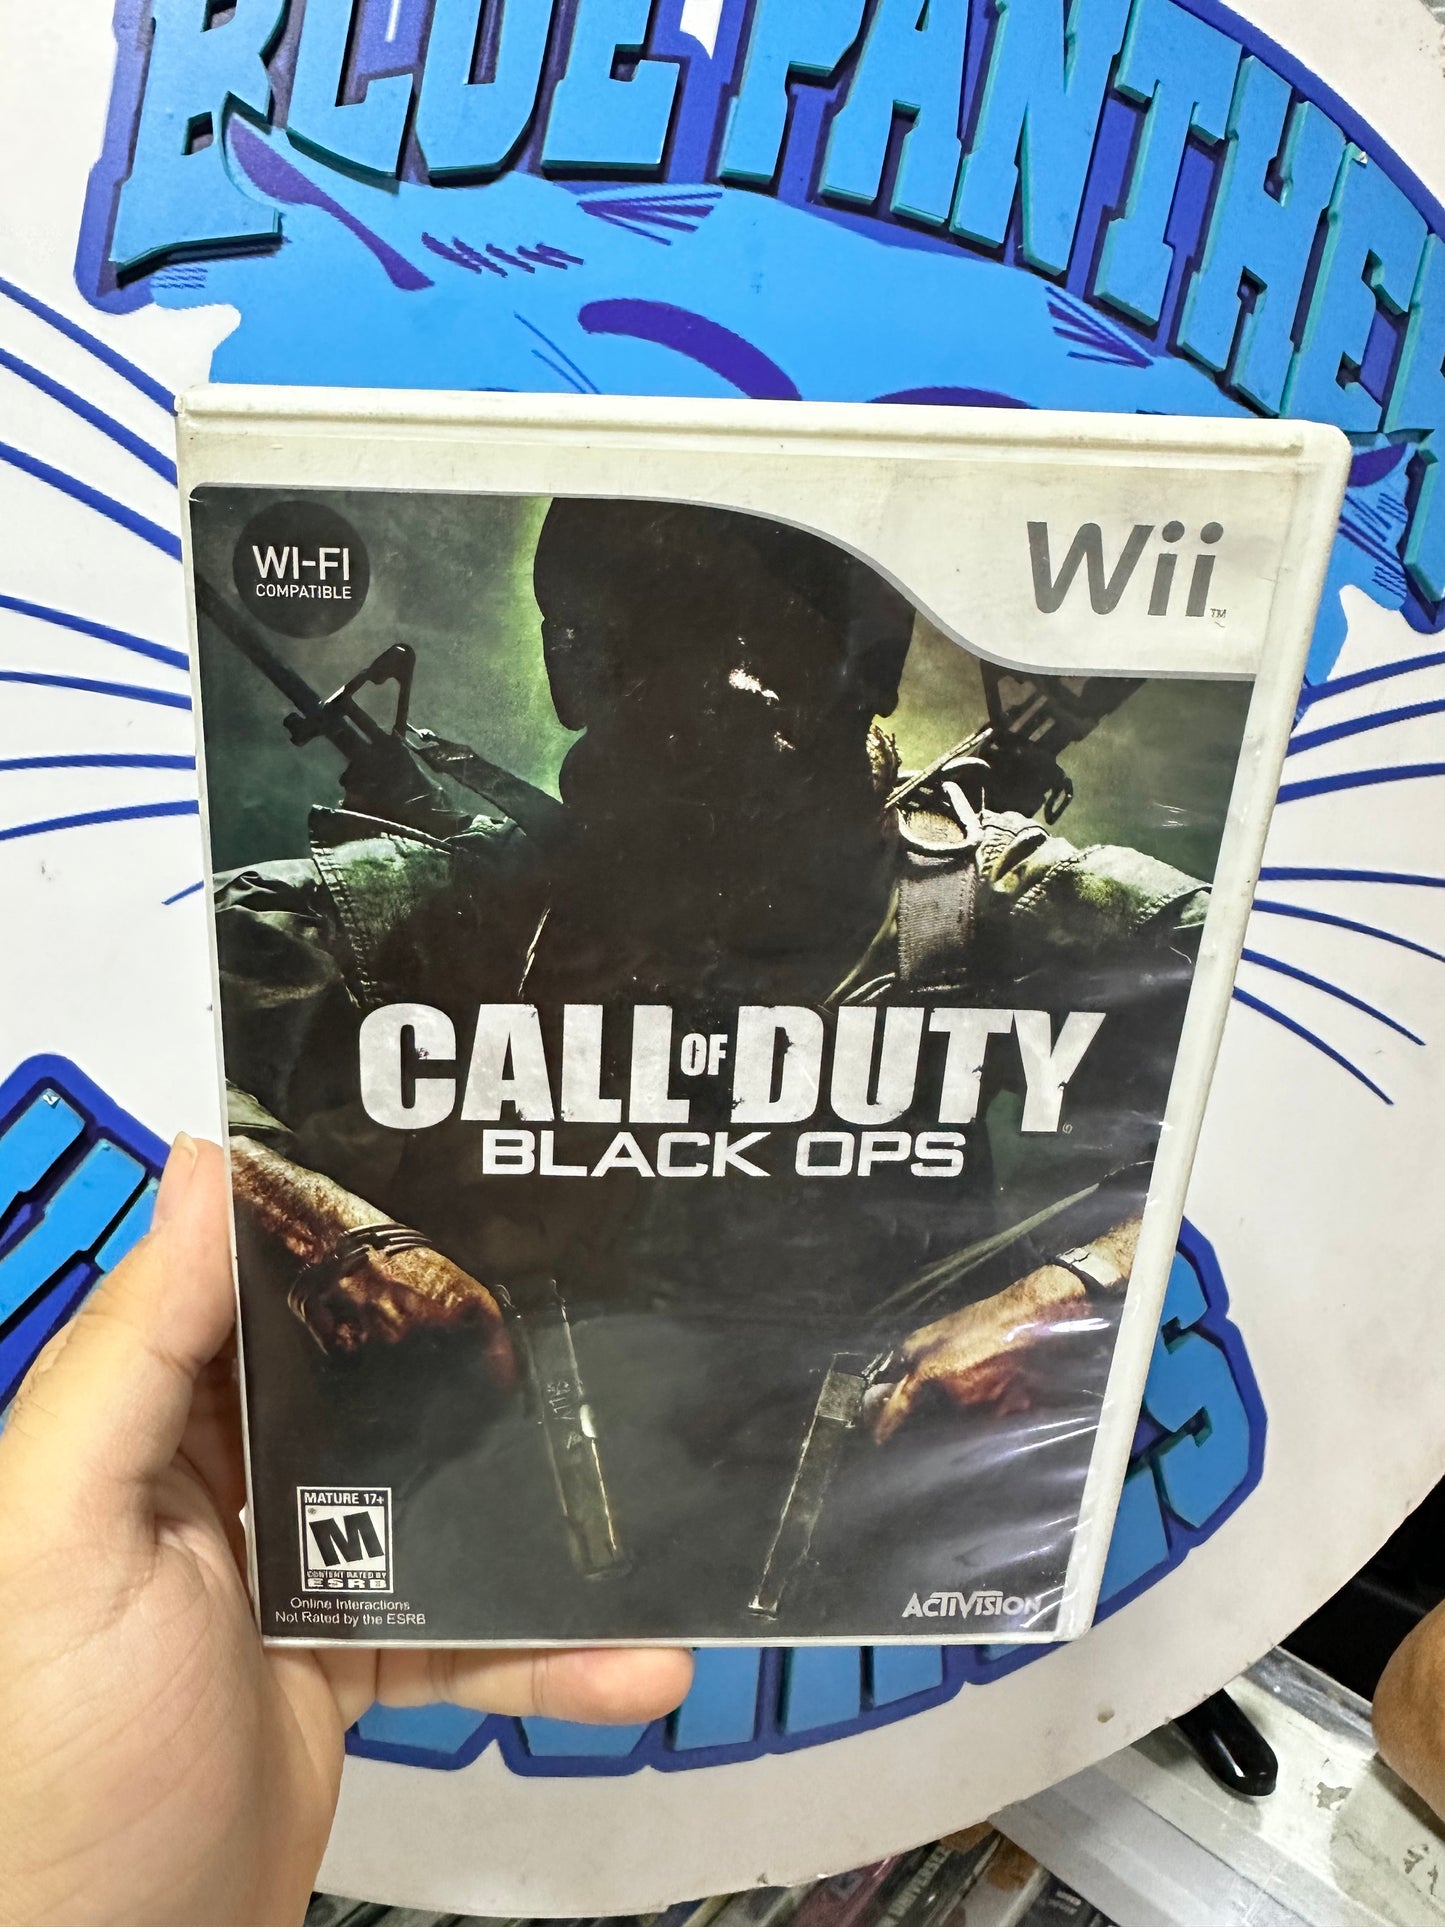 Call of duty Black Ops-Nintendo wii